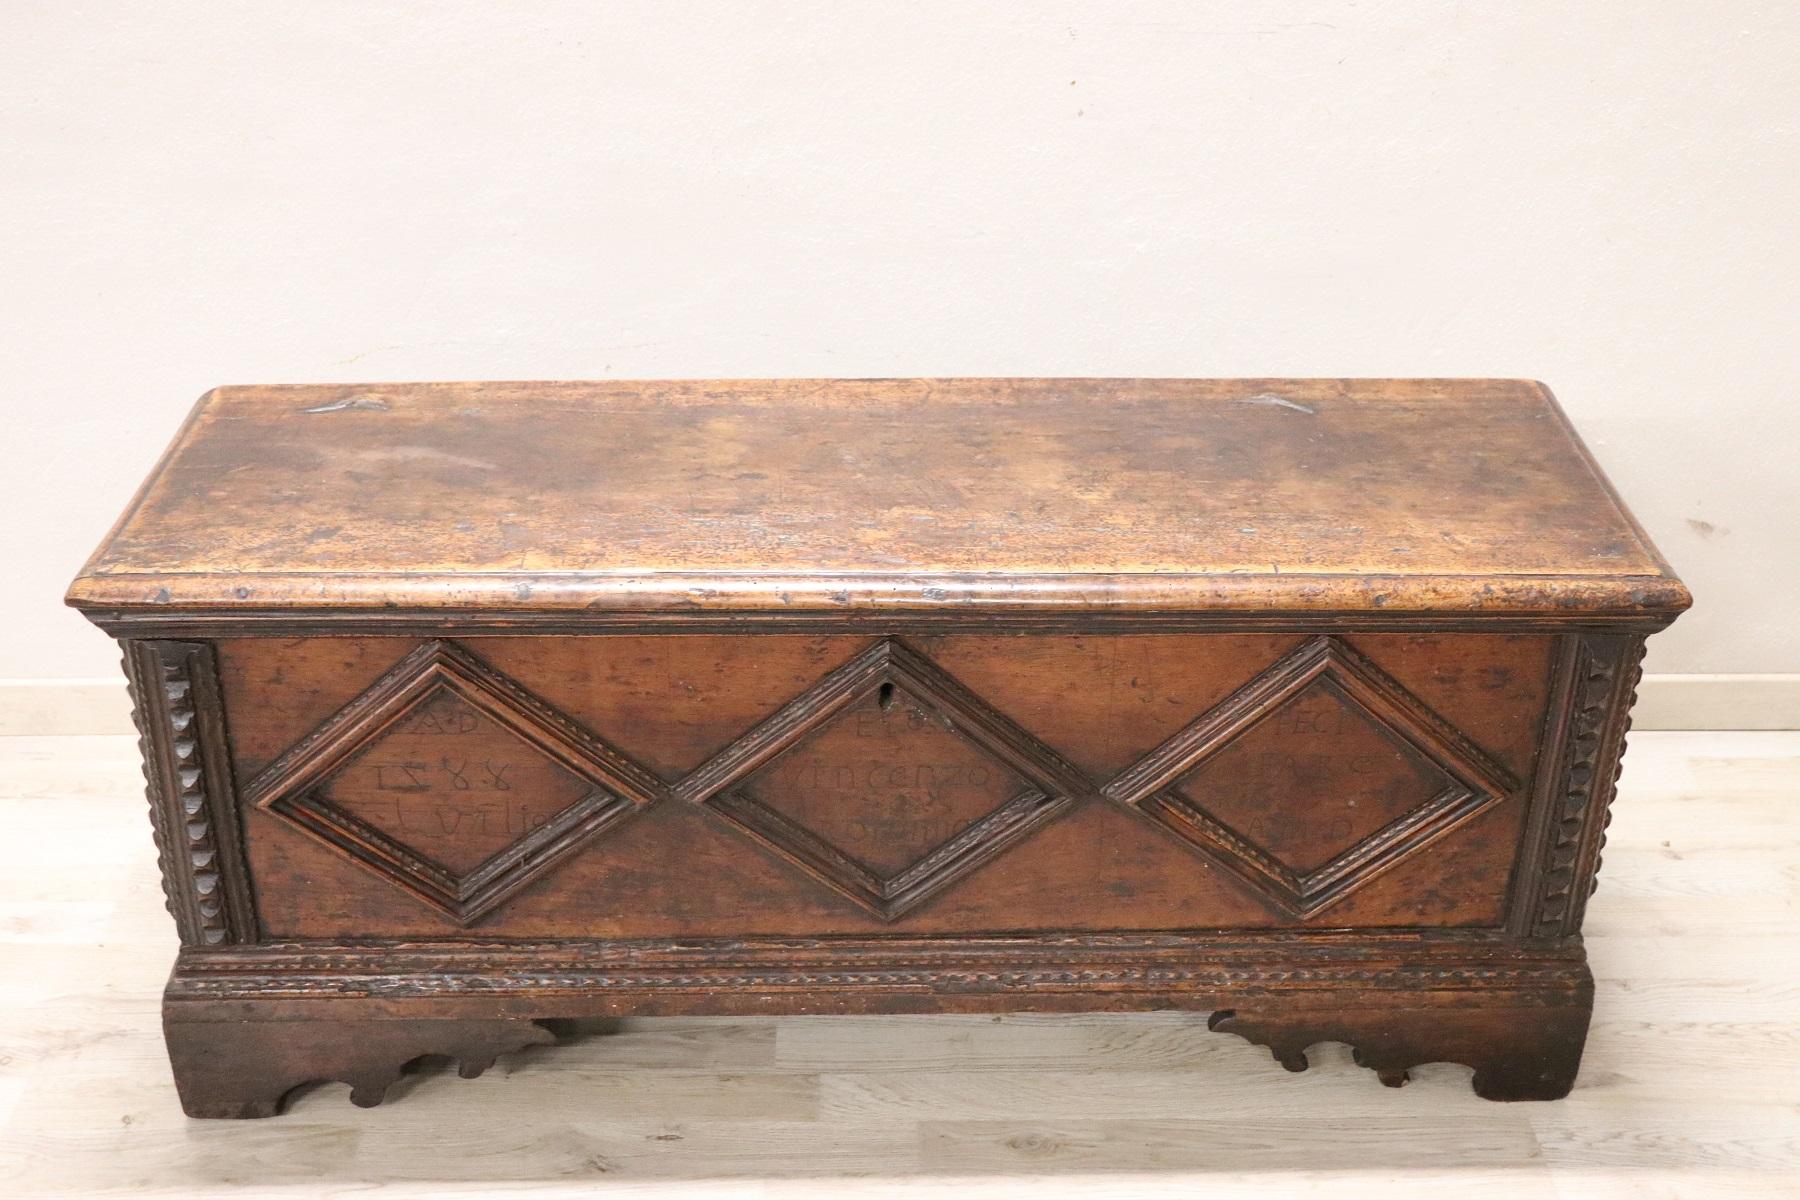 Beautiful antique blanket chest in solid walnut wood. Characterized by inscriptions engraved on the front including the manufacturing date 1788. Inside a small drawer. The antique blanket chest also completely original and has great charm. In